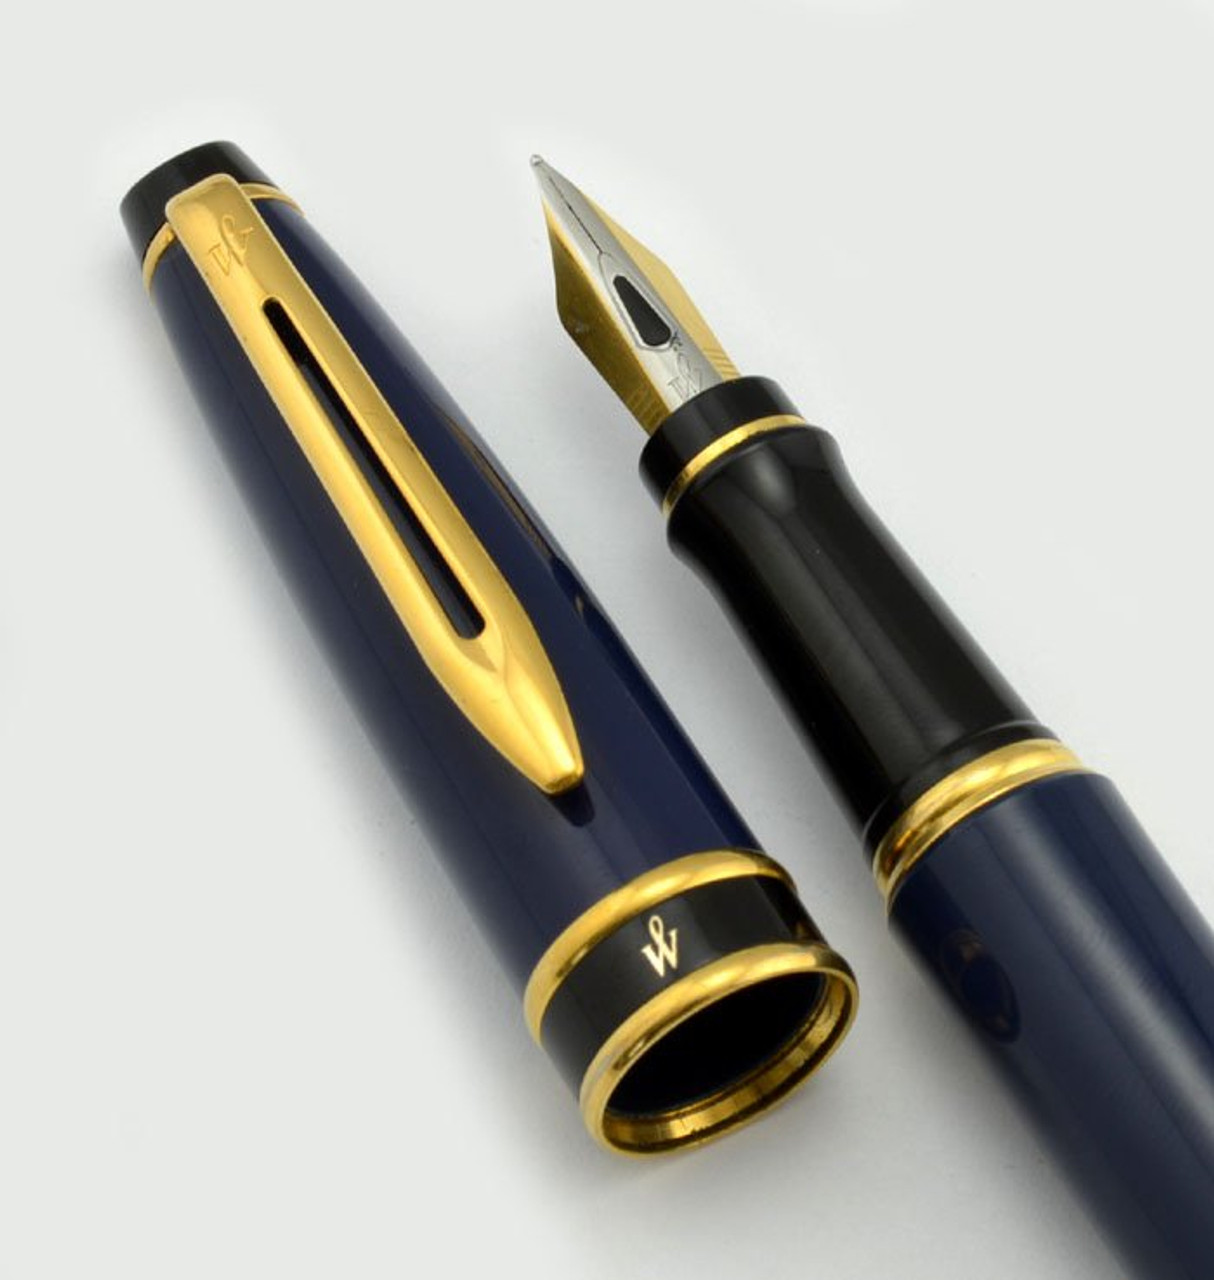  Waterman Expert Fountain Pen, Metal & Blue Lacquer, Chiselled  Cap, Stainless Steel Fine Nib, Blue Ink